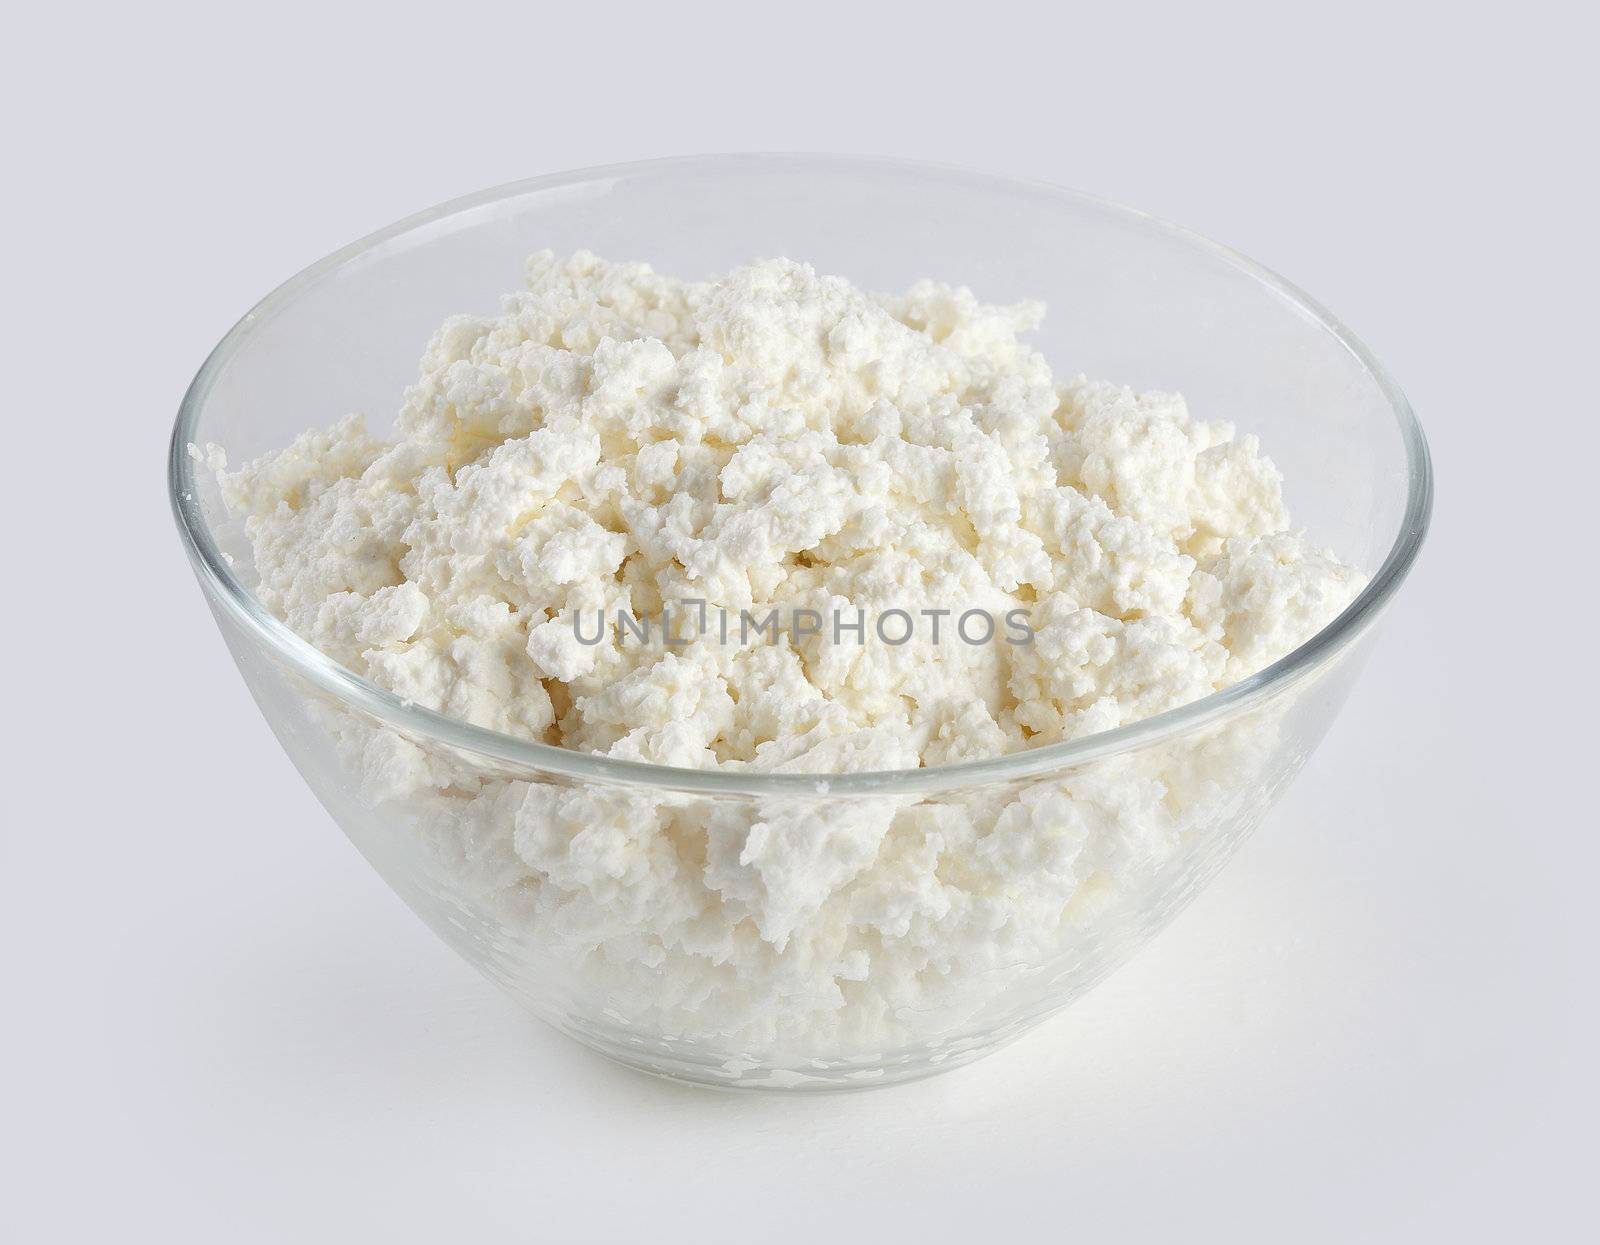 Cottage cheese in the transparent glass bowl